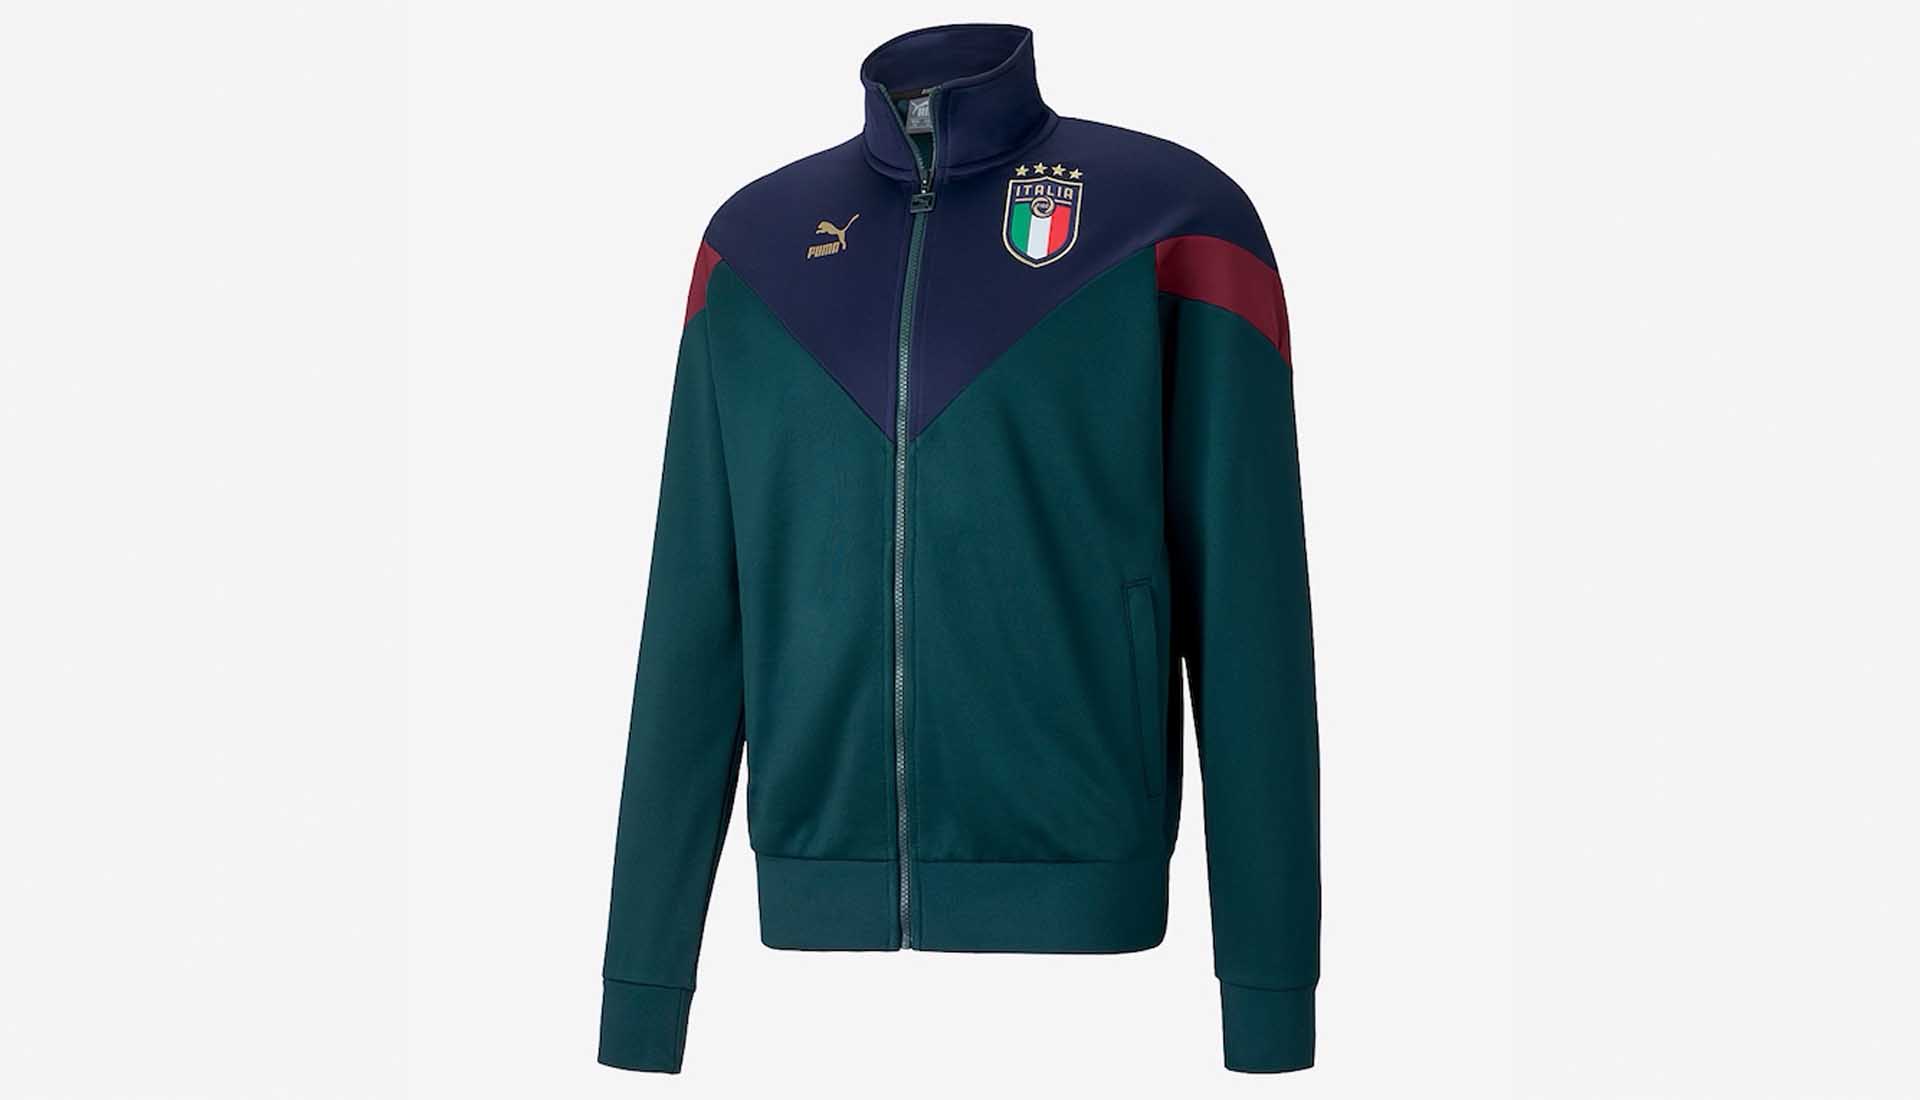 PUMA Launch Italy Renaissance Kit Clothing Collection - SoccerBible